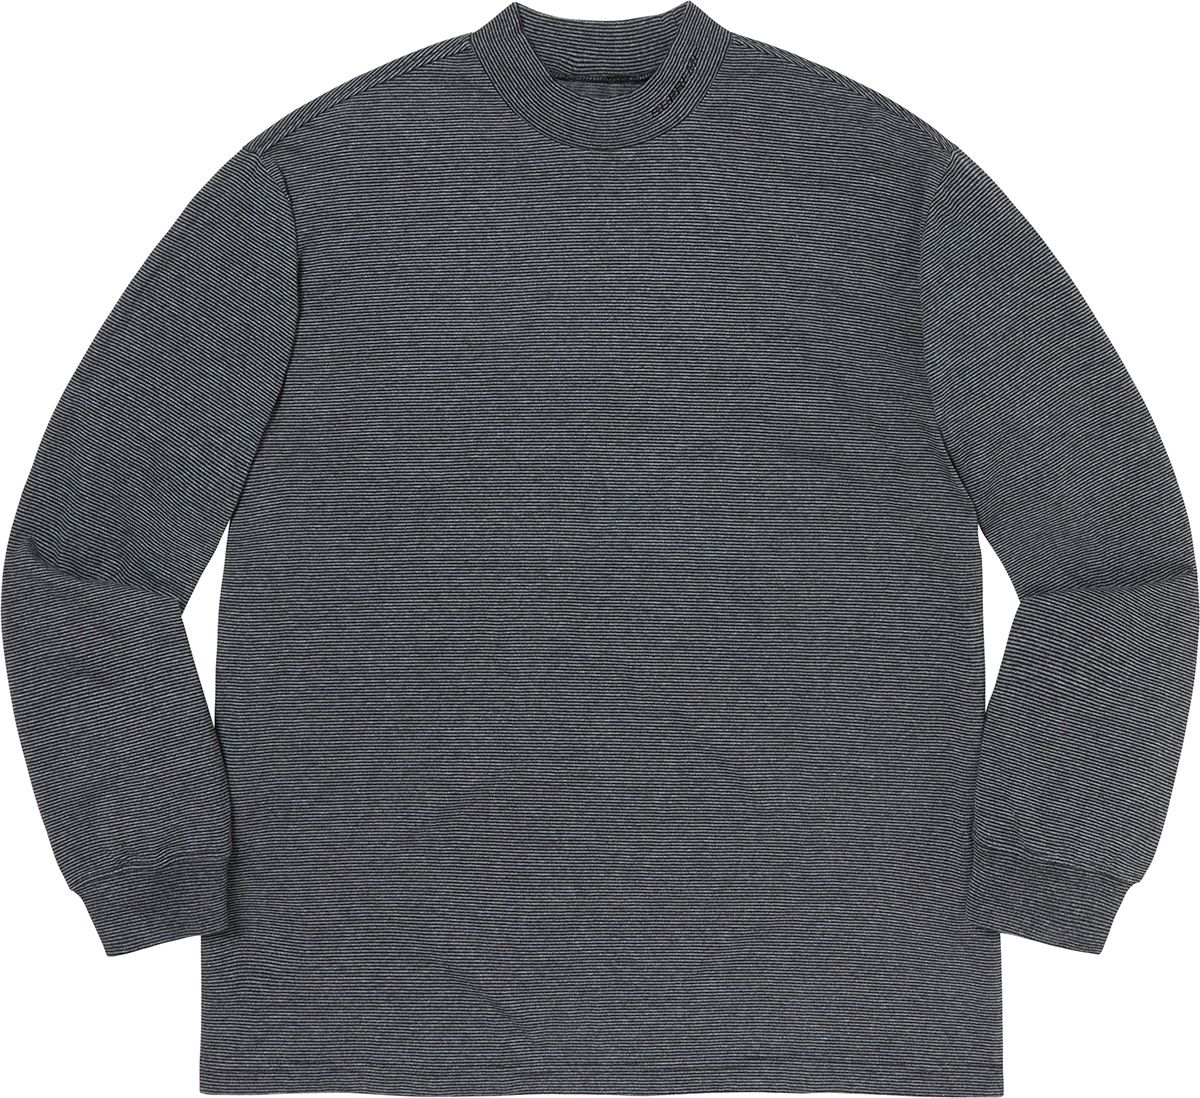 Scatter Text Crewneck - Fall/Winter 2019 Preview – Supreme